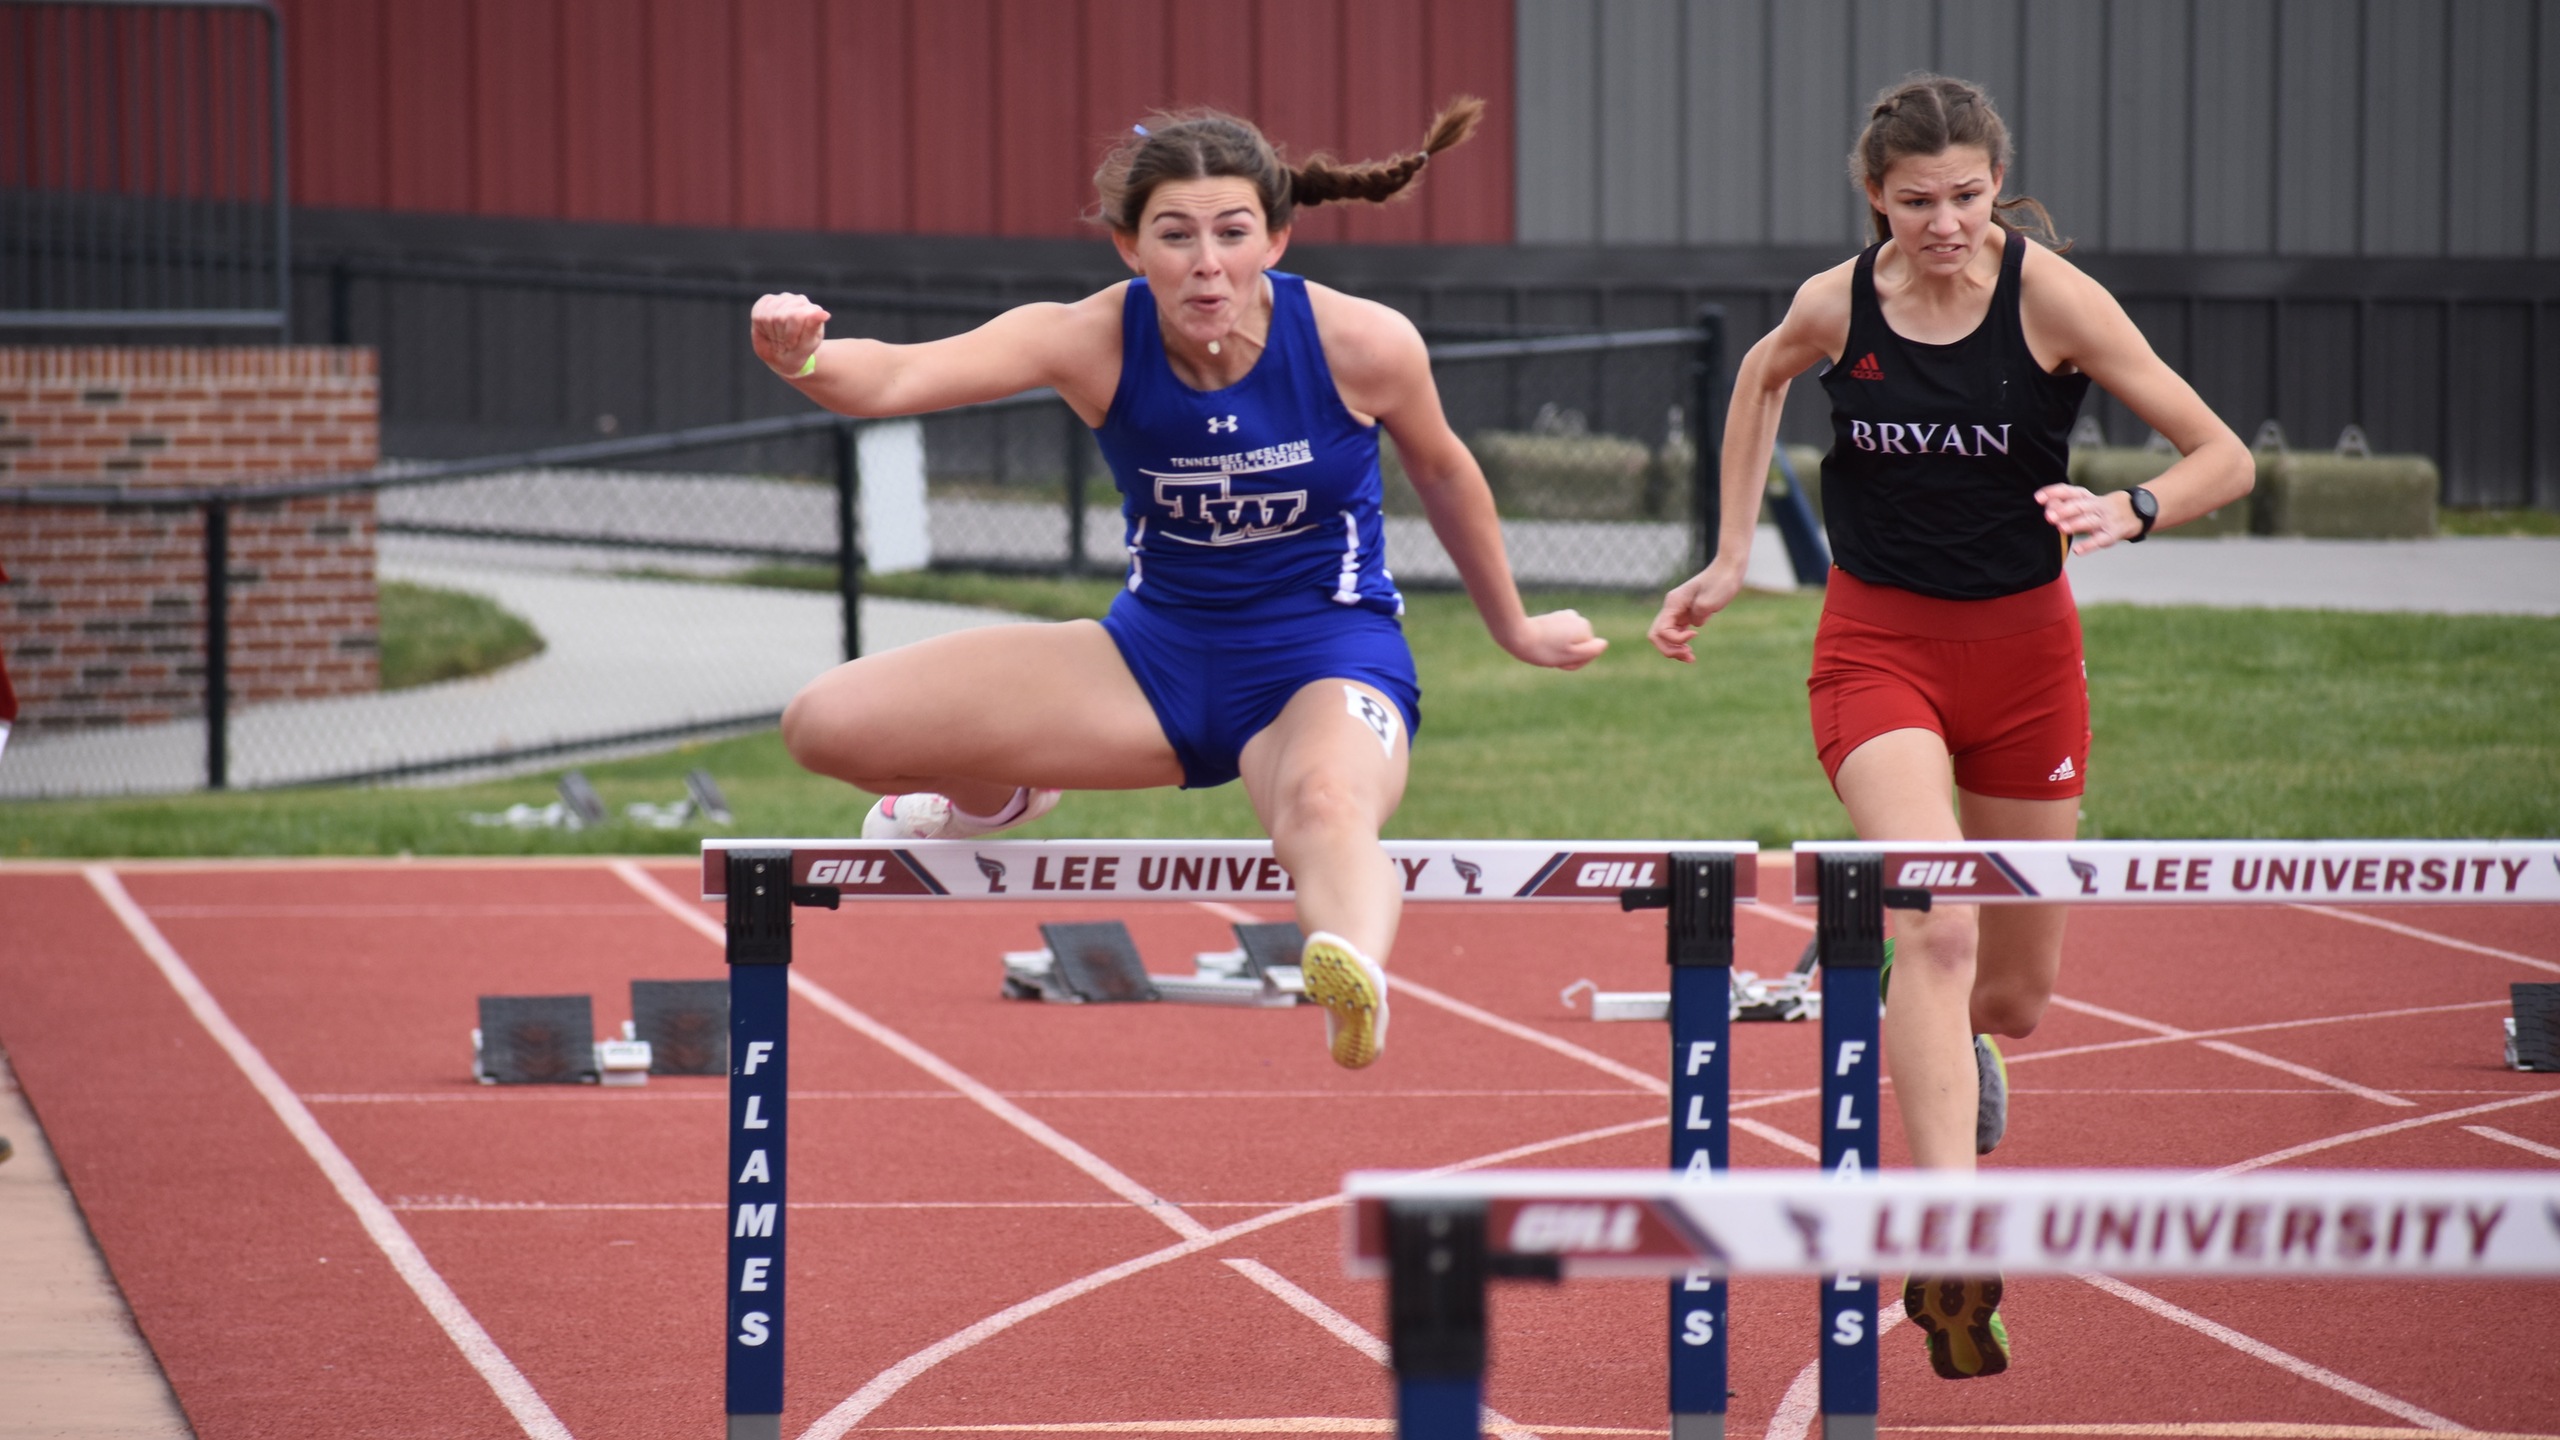 Women's Outdoor Track and Field Debuts at Lee University Invitational